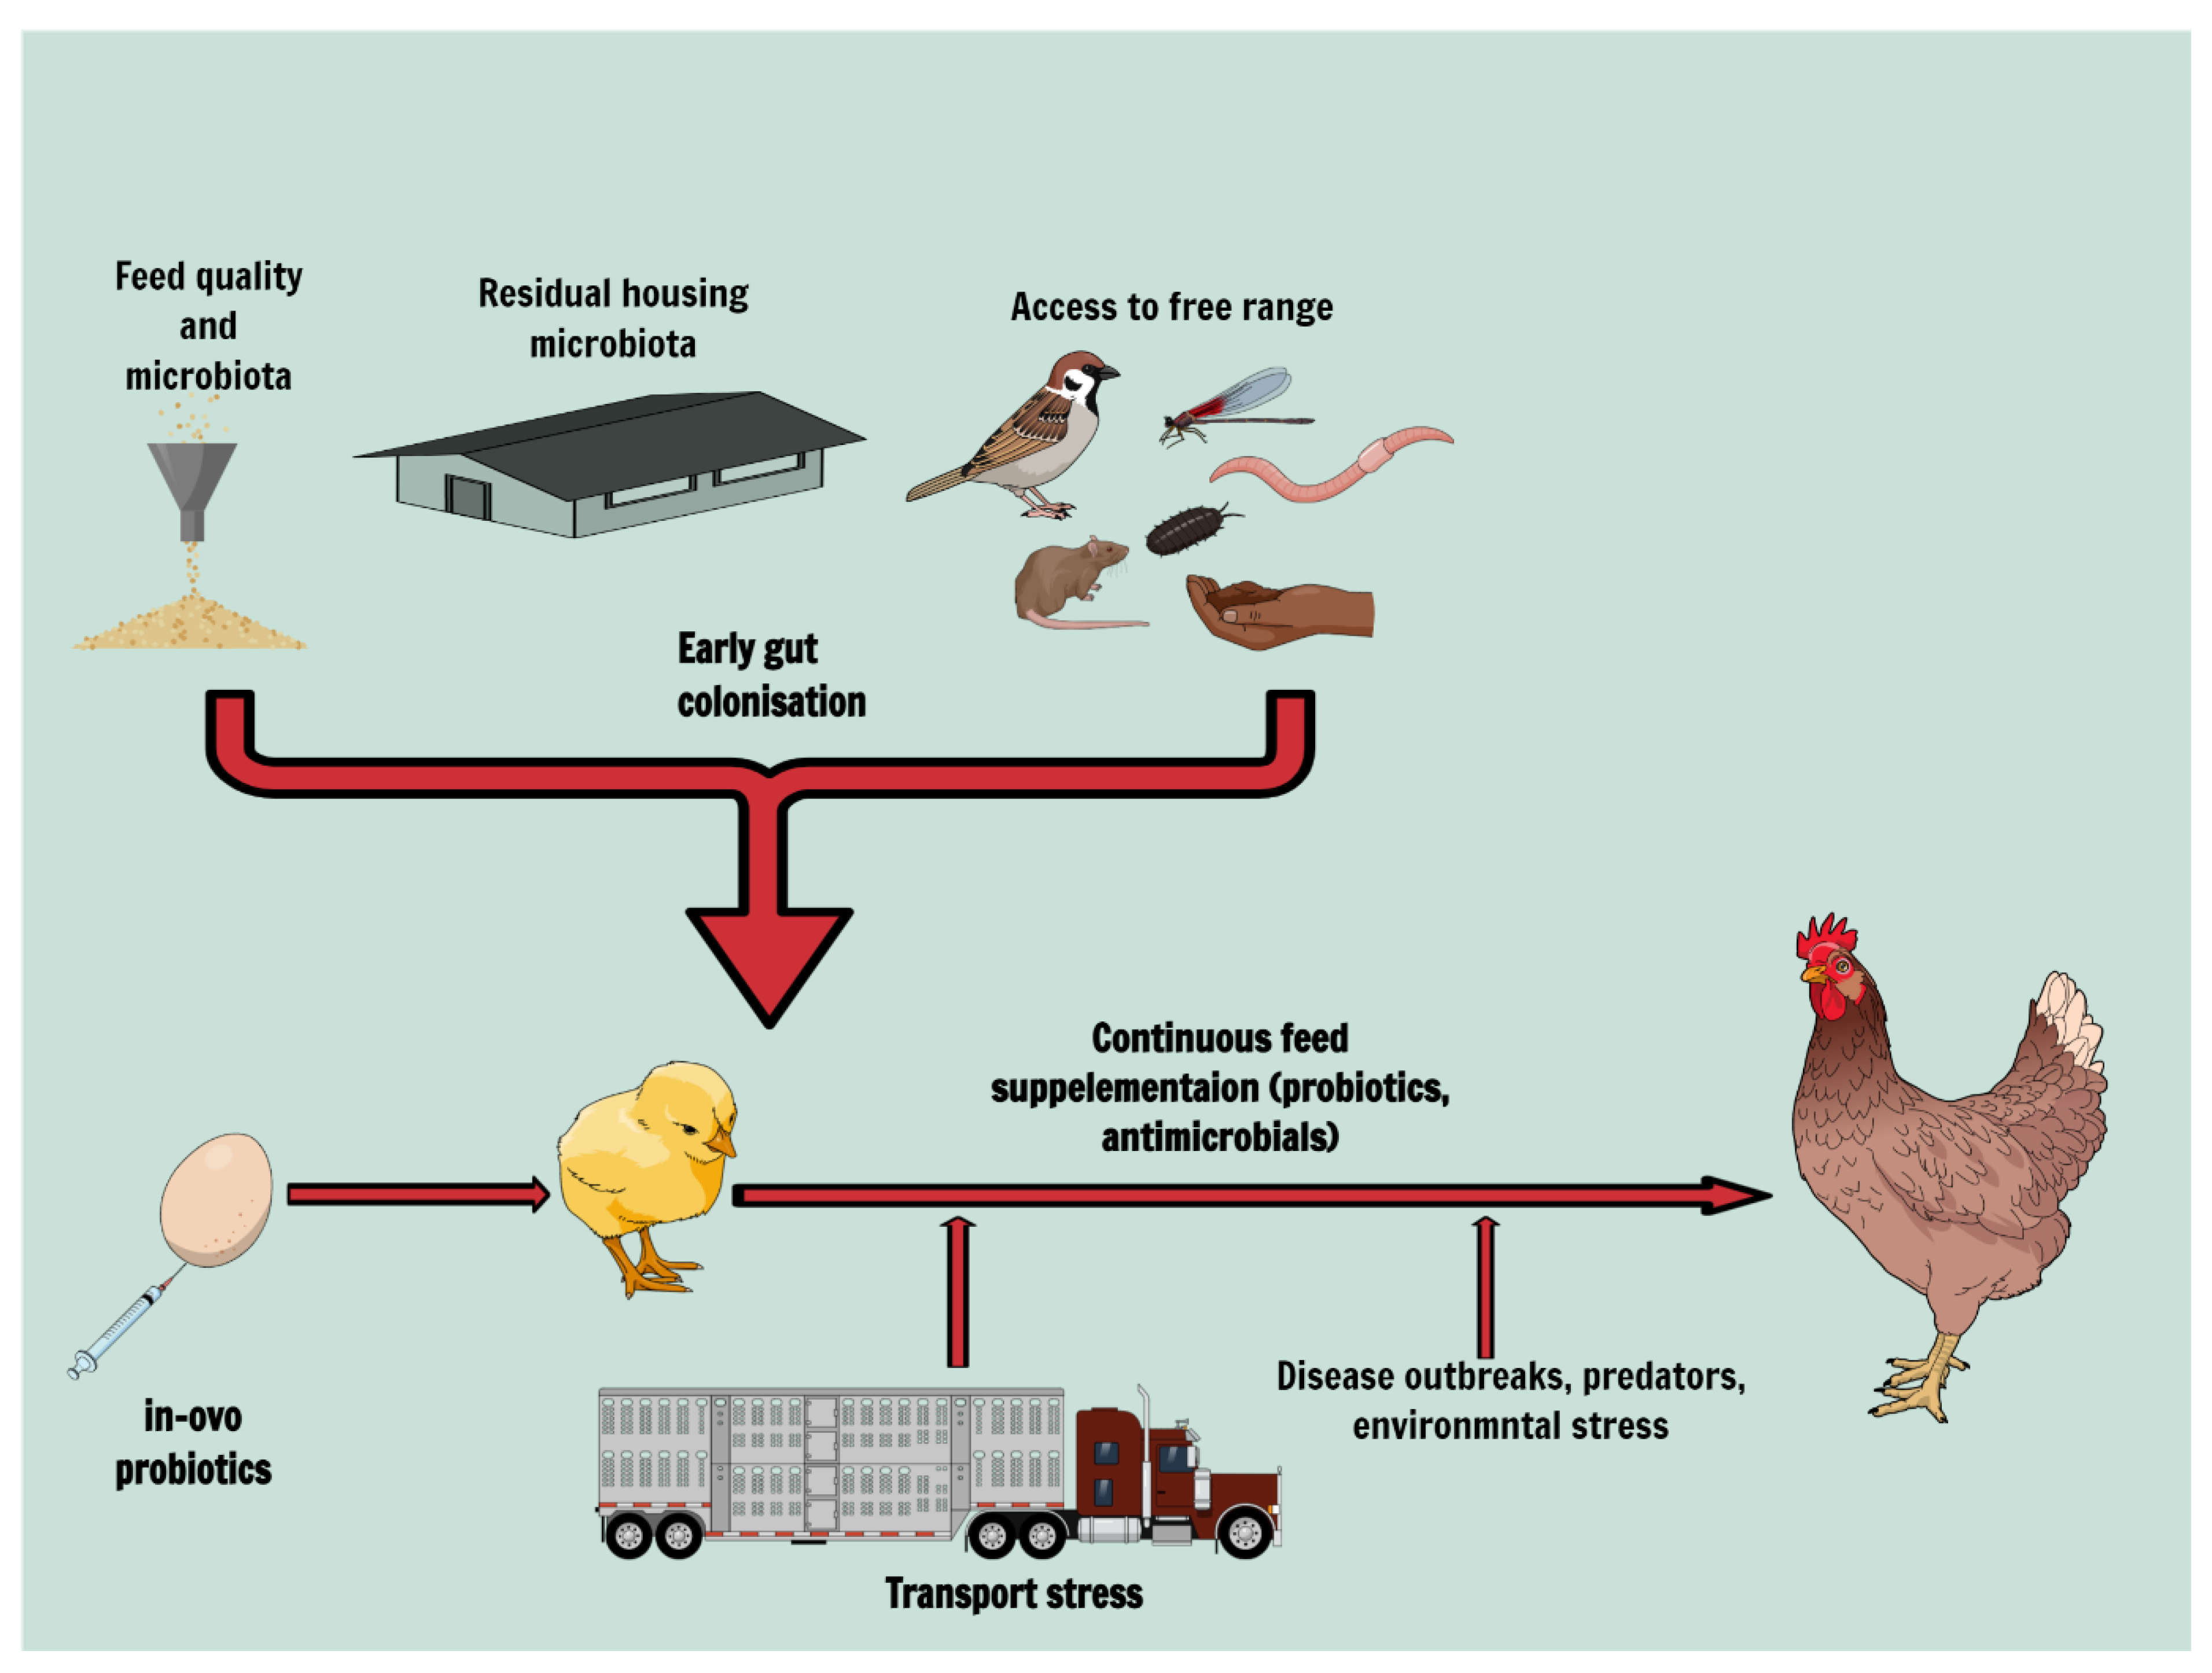 IV. Benefits of Hens on Soil Health and Fertilization